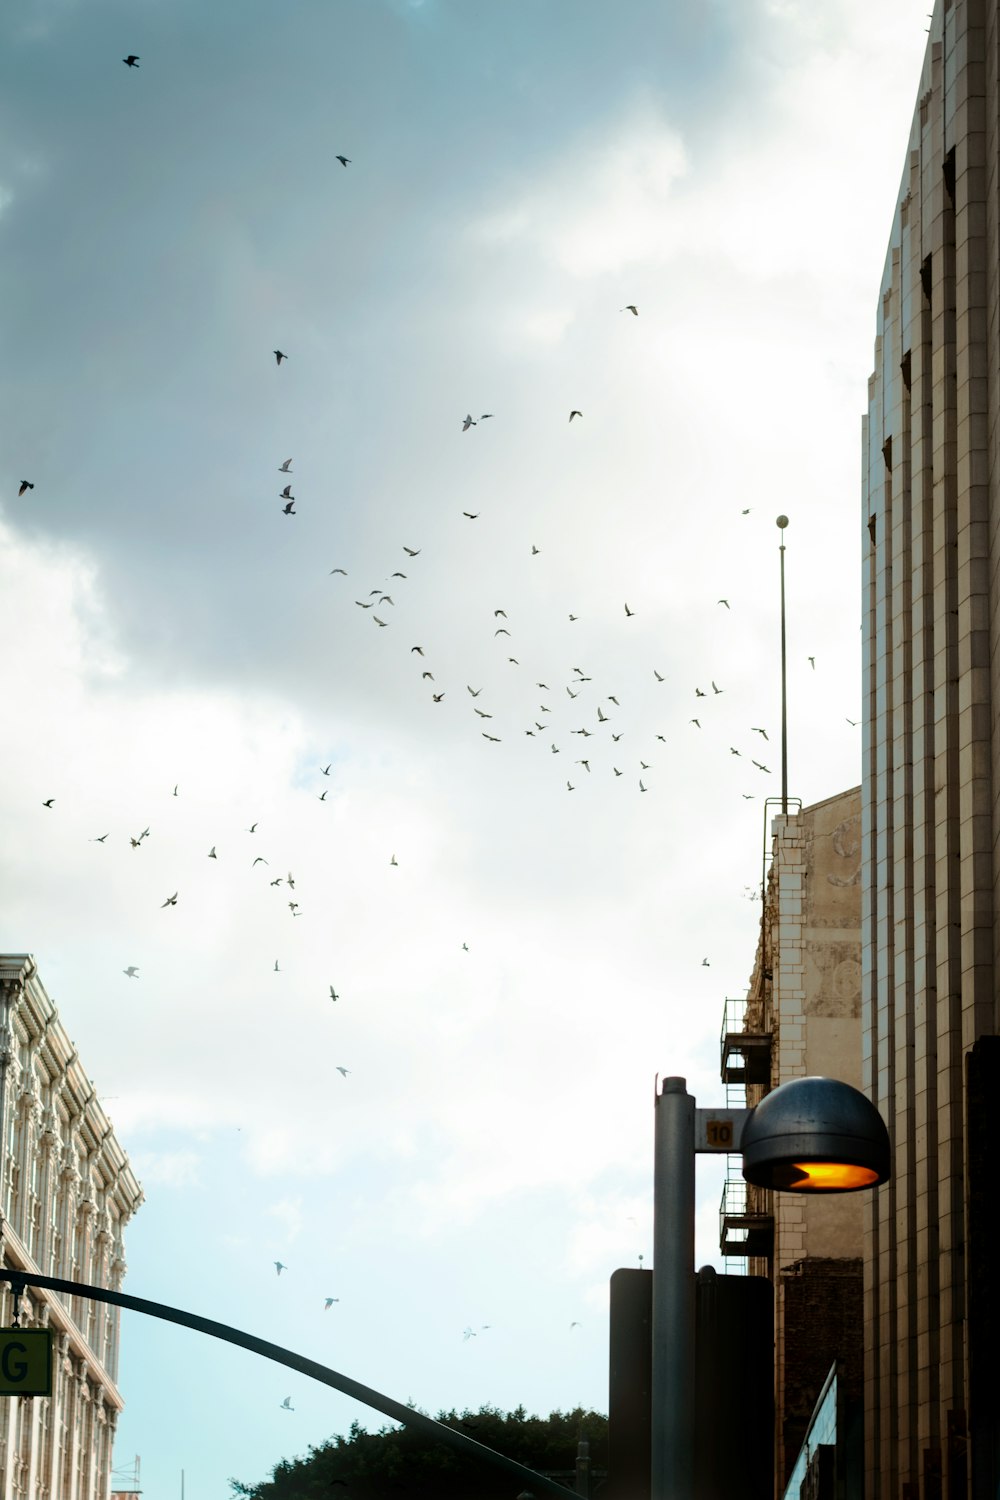 flock of birds flying over the high rise buildings during daytime